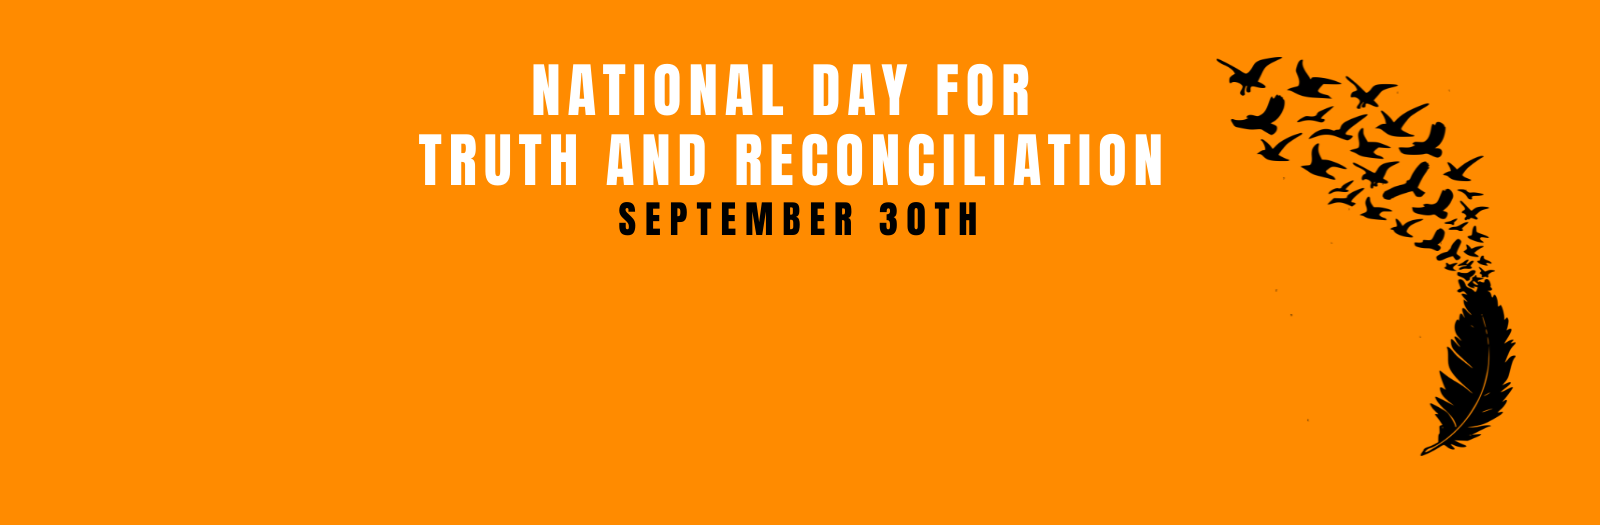 Orange banner with black feather to the left. The words National Day for Truth and Reconciliation September 30th in the middle.